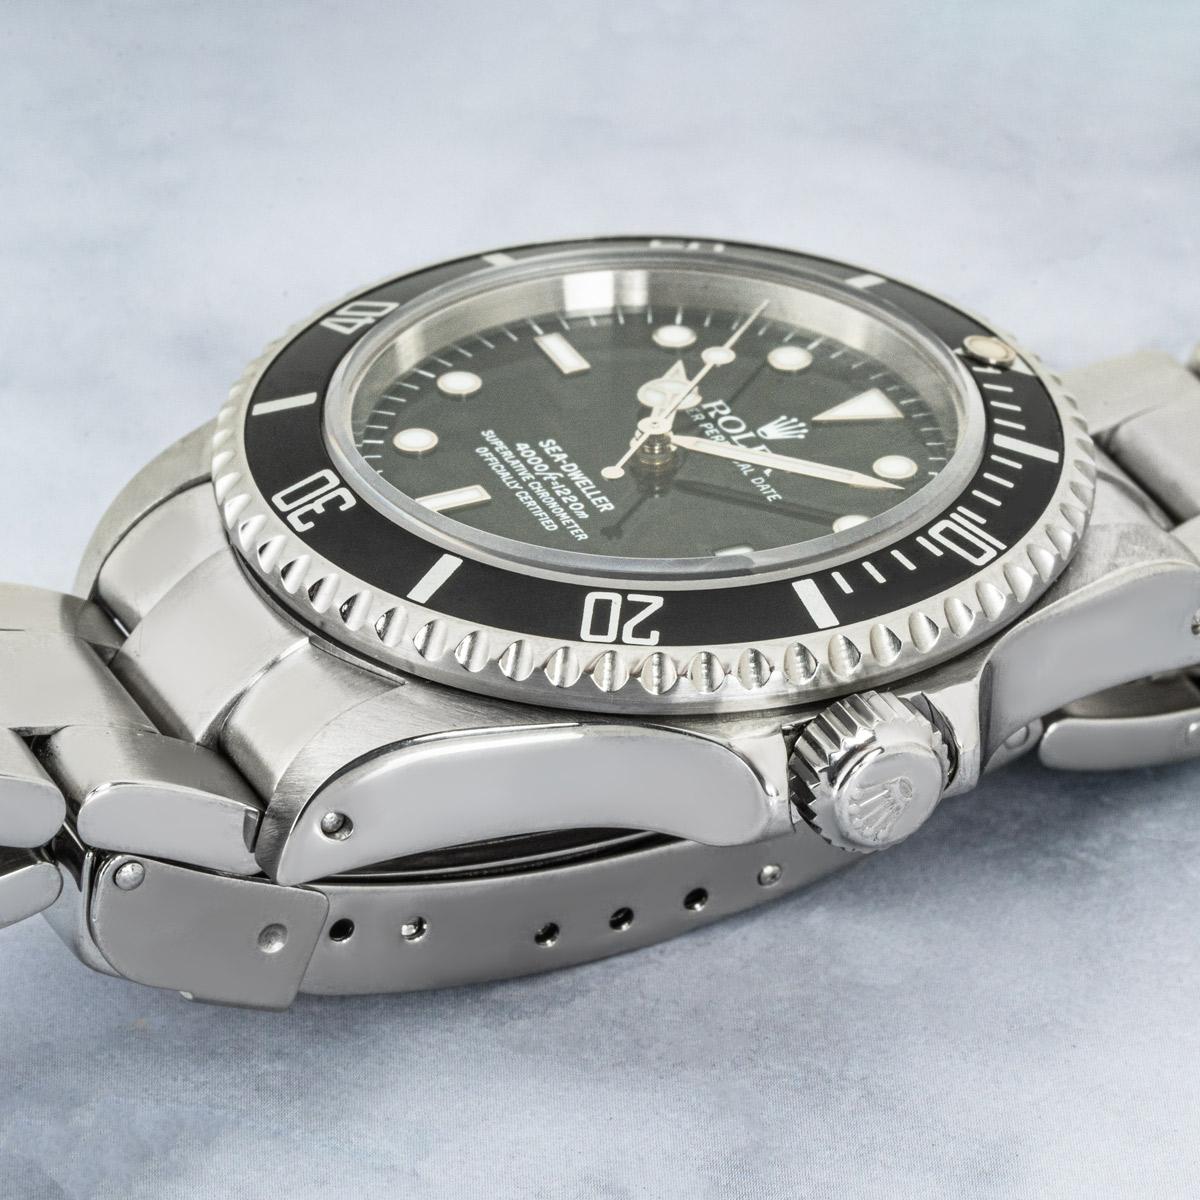 A 40mm Sea-Dweller crafted in steel by Rolex. Featuring a black dial with applied hour markers, a date indicator and a black unidirectional rotatable bezel set with 60 minute graduations.

Fitted with a scratch-resistant sapphire crystal, a